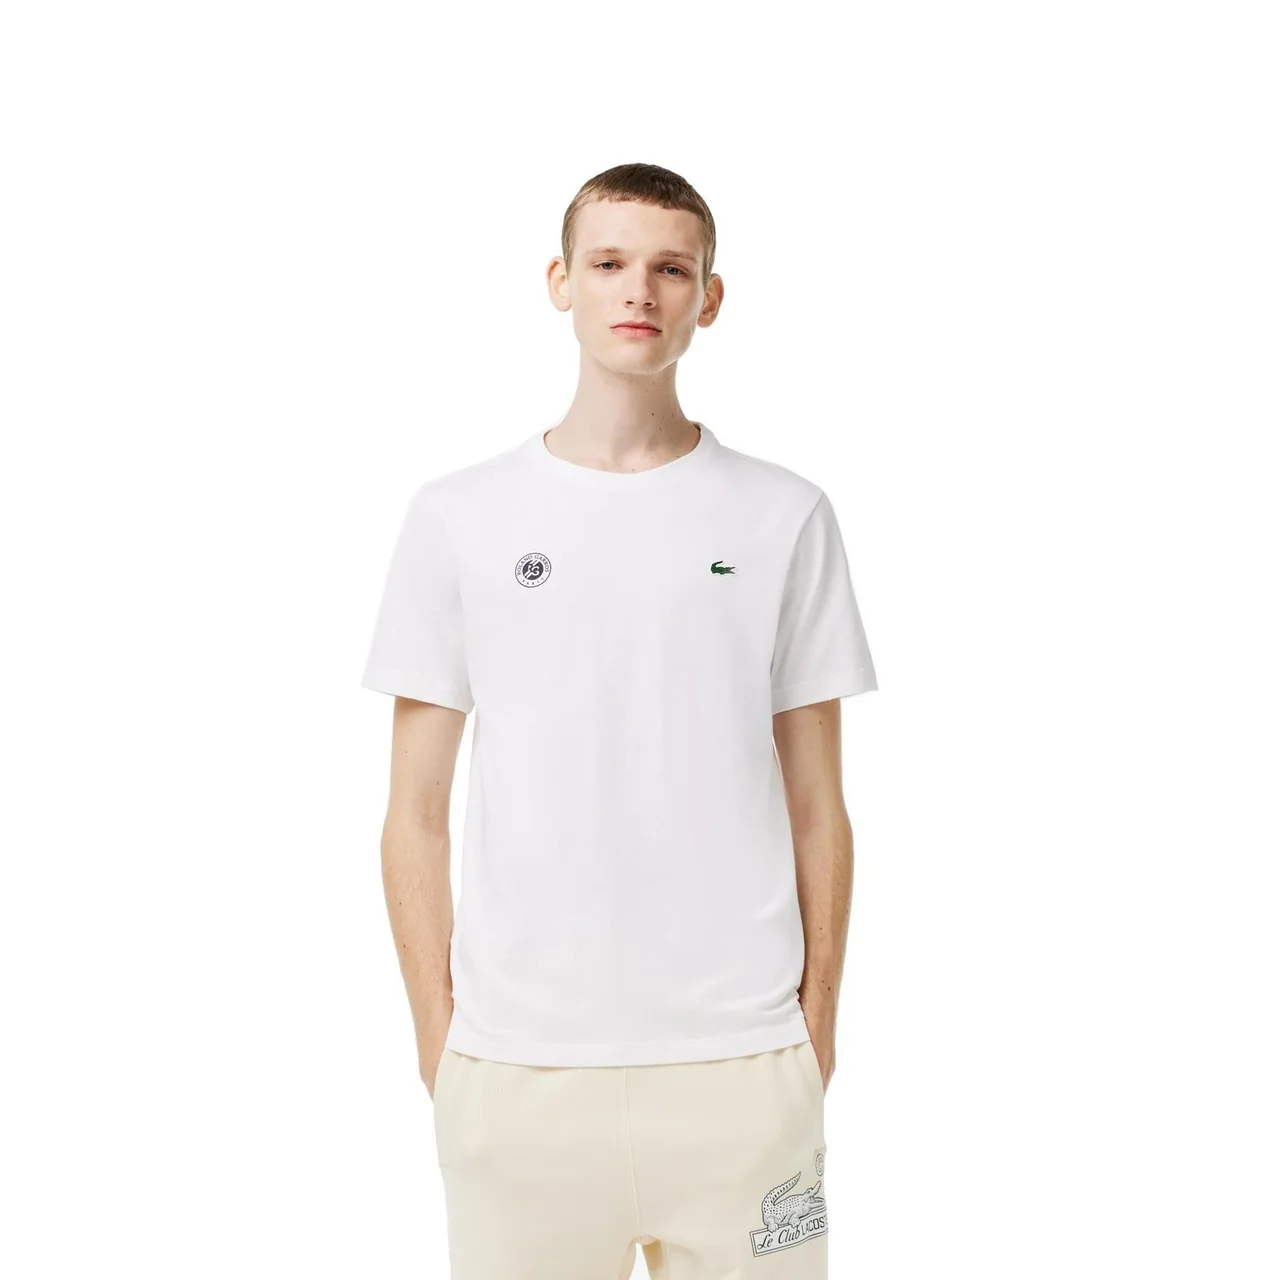 Lacoste Roland Garros Edition Performance Ultra-Dry Jersey T-Shirt White